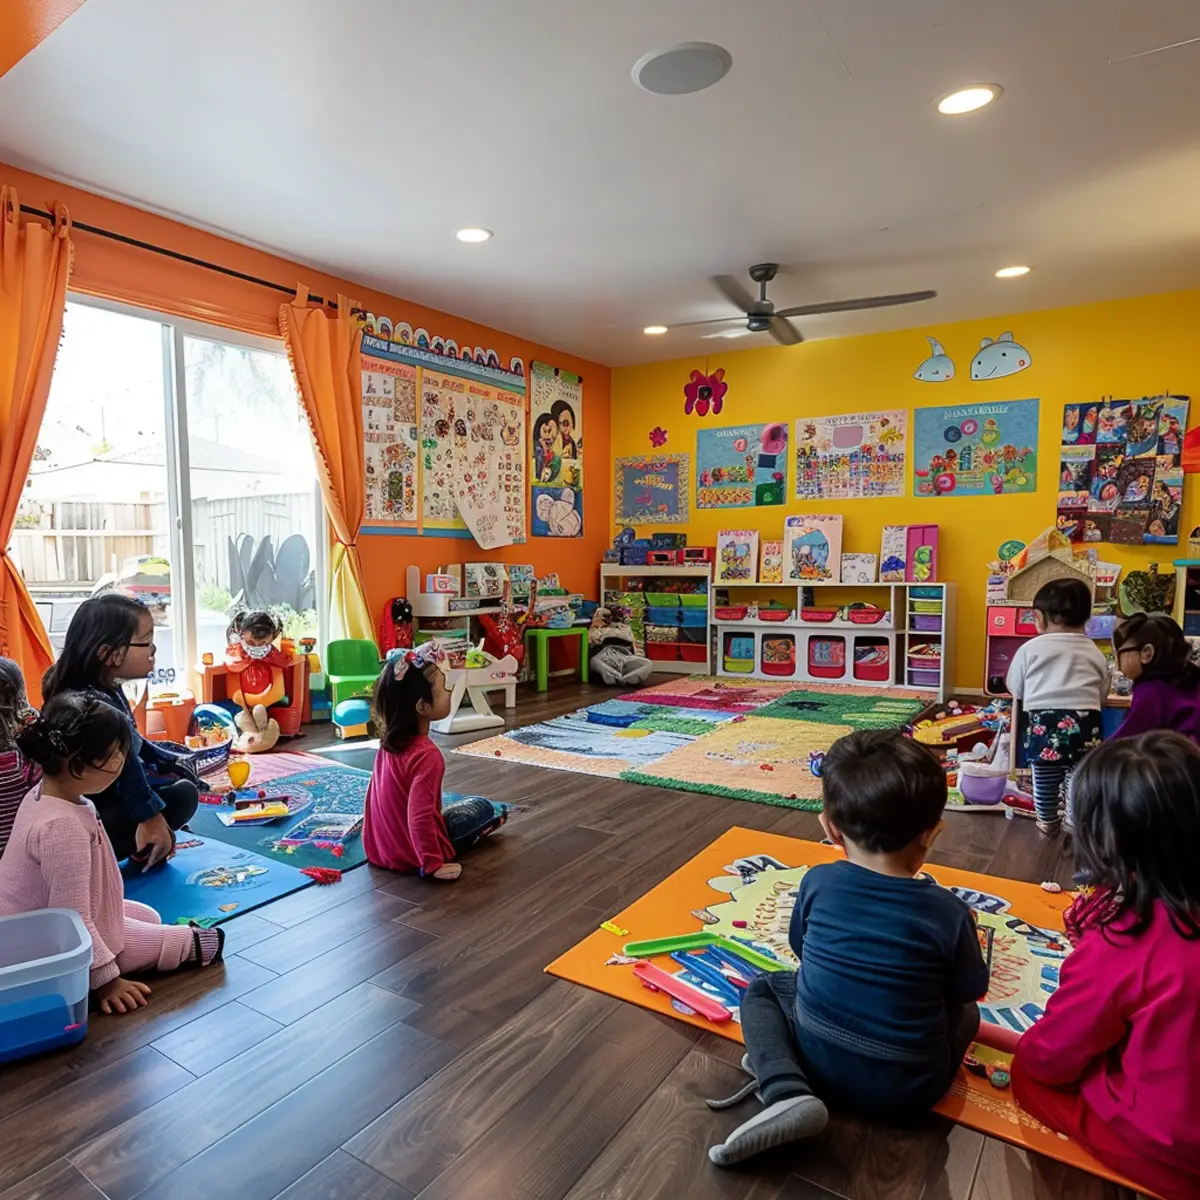 Home Daycare Services Proposal Concepts